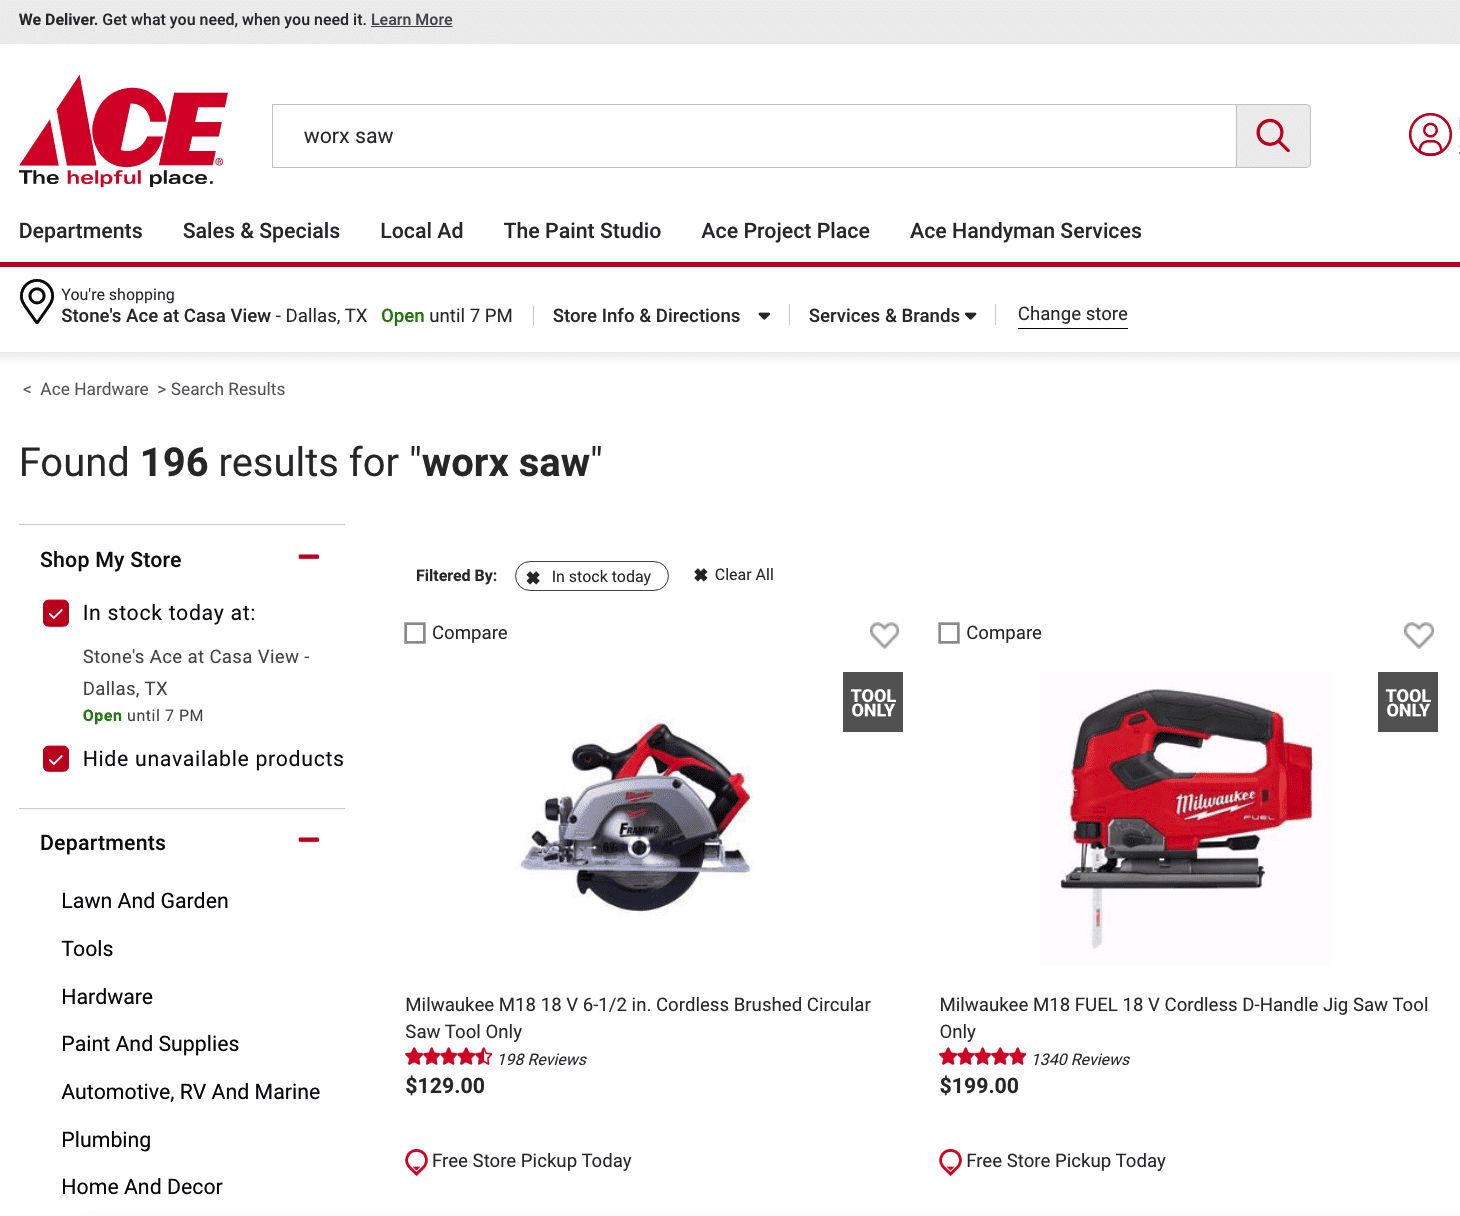 Ace Hardware's search functionality to show inventory available for pick up at my store location